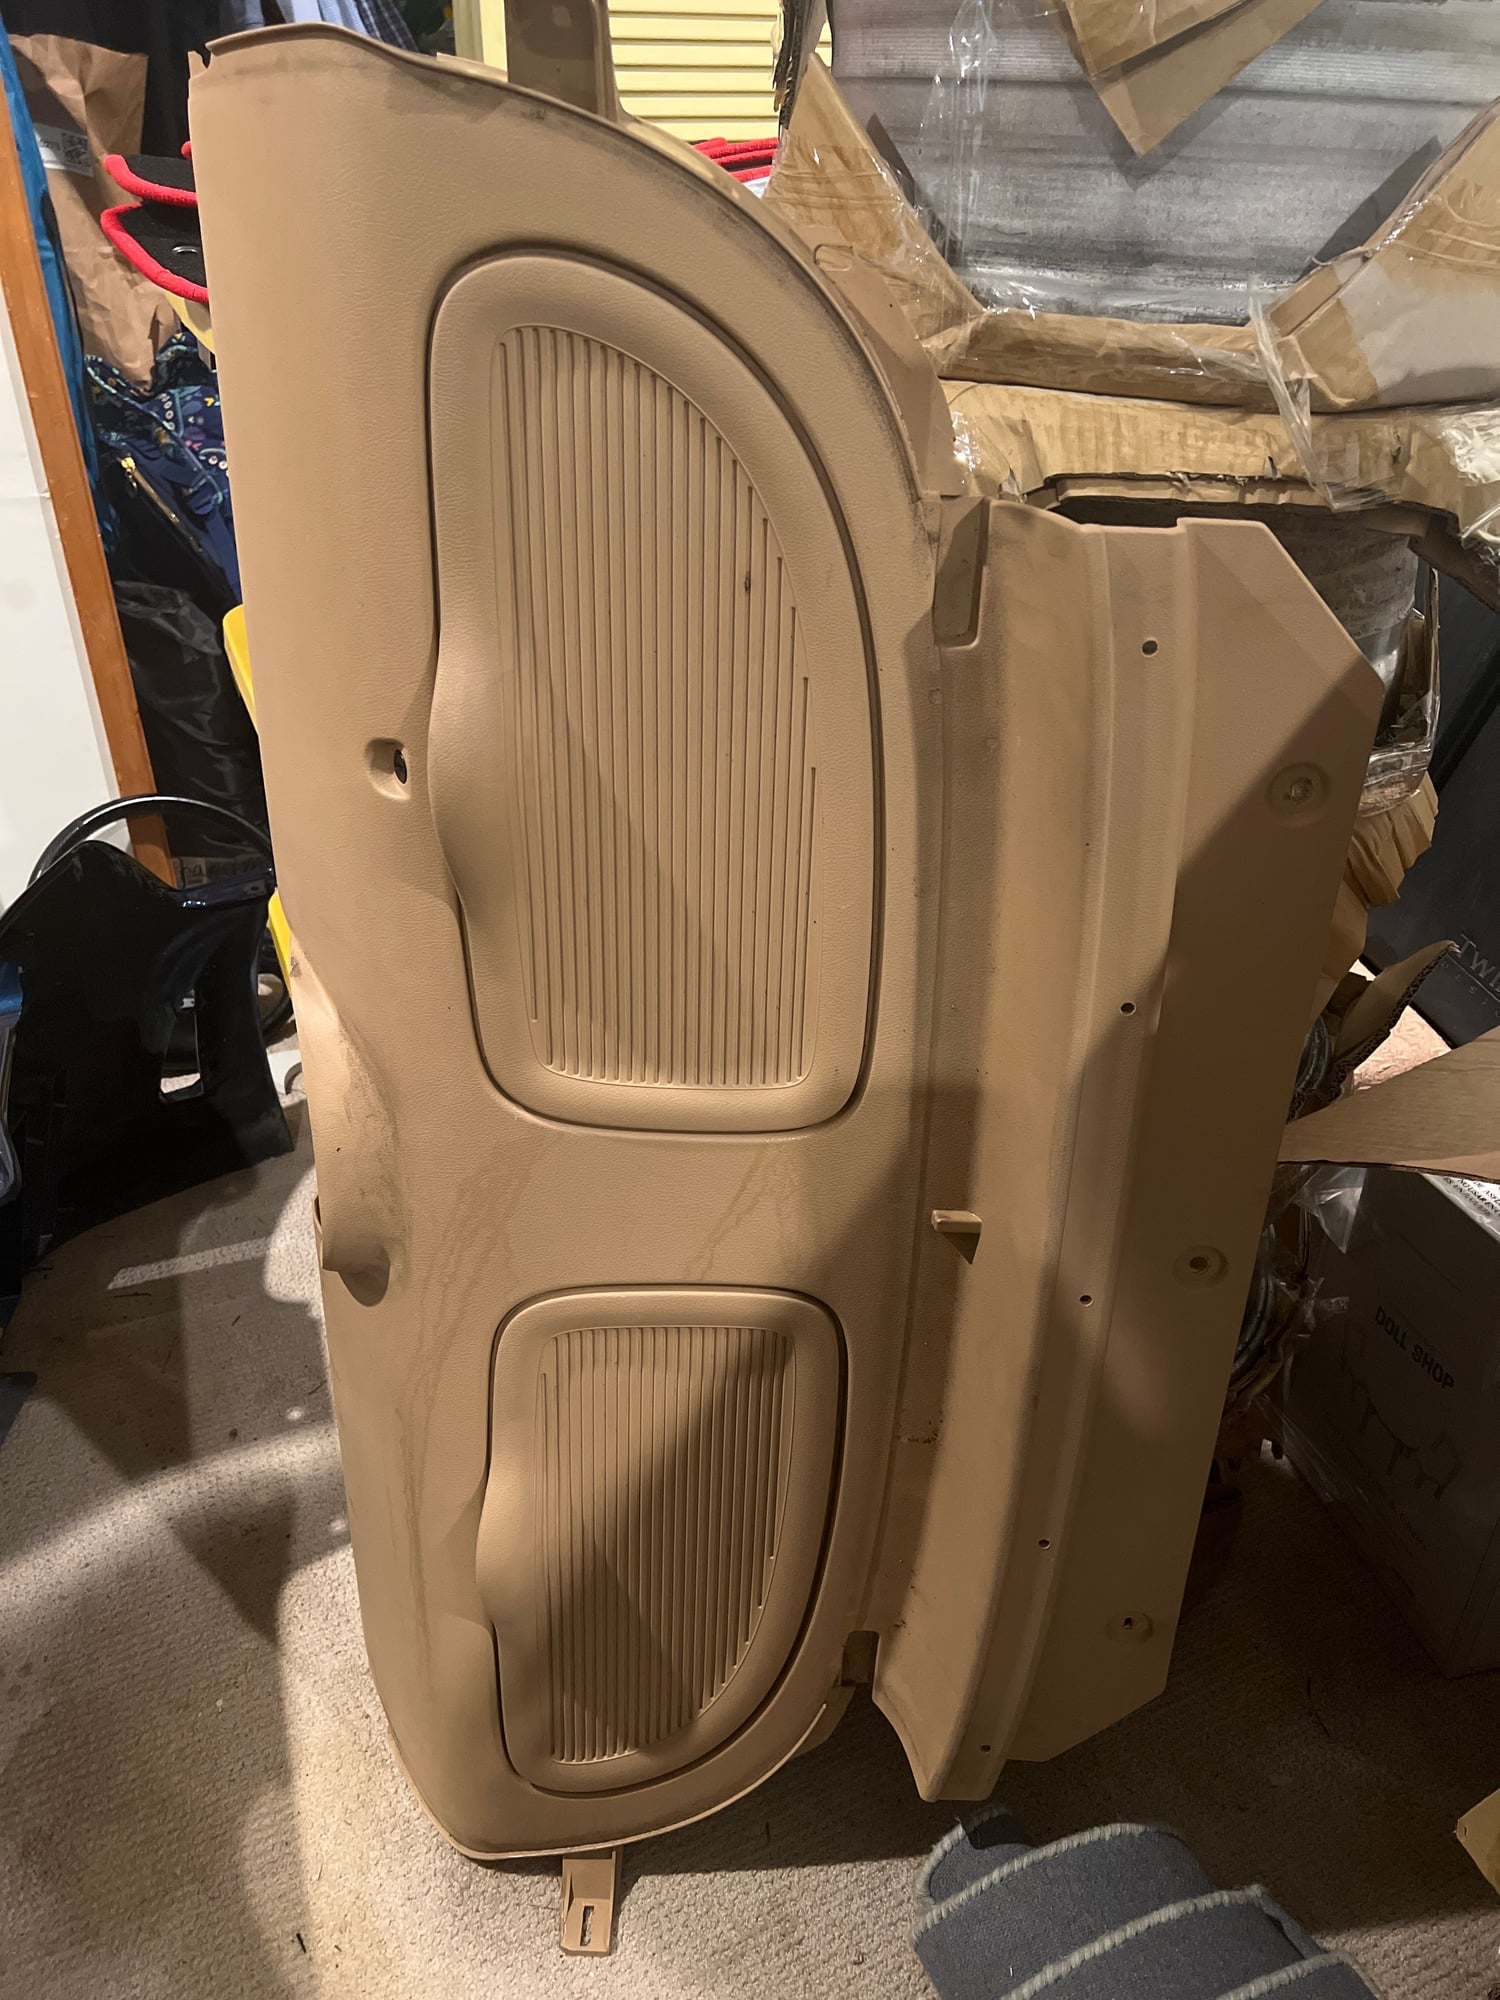 Interior/Upholstery - Tan interior pieces - Used - 1993 to 2002 Mazda RX-7 - Edmonds, WA 98020, United States